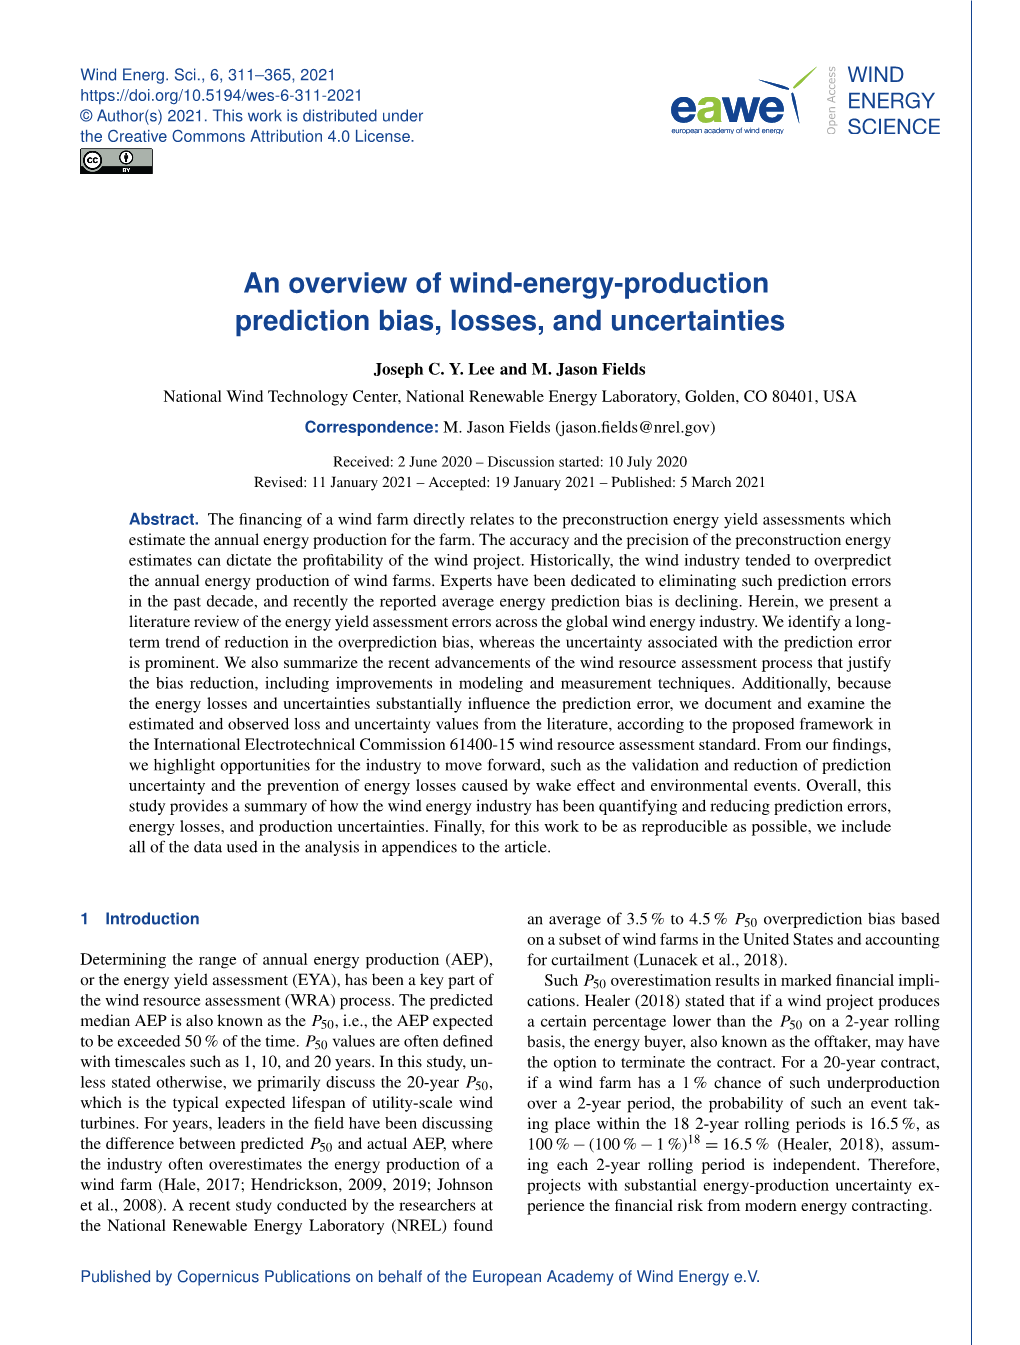 An Overview of Wind-Energy-Production Prediction Bias, Losses, and Uncertainties